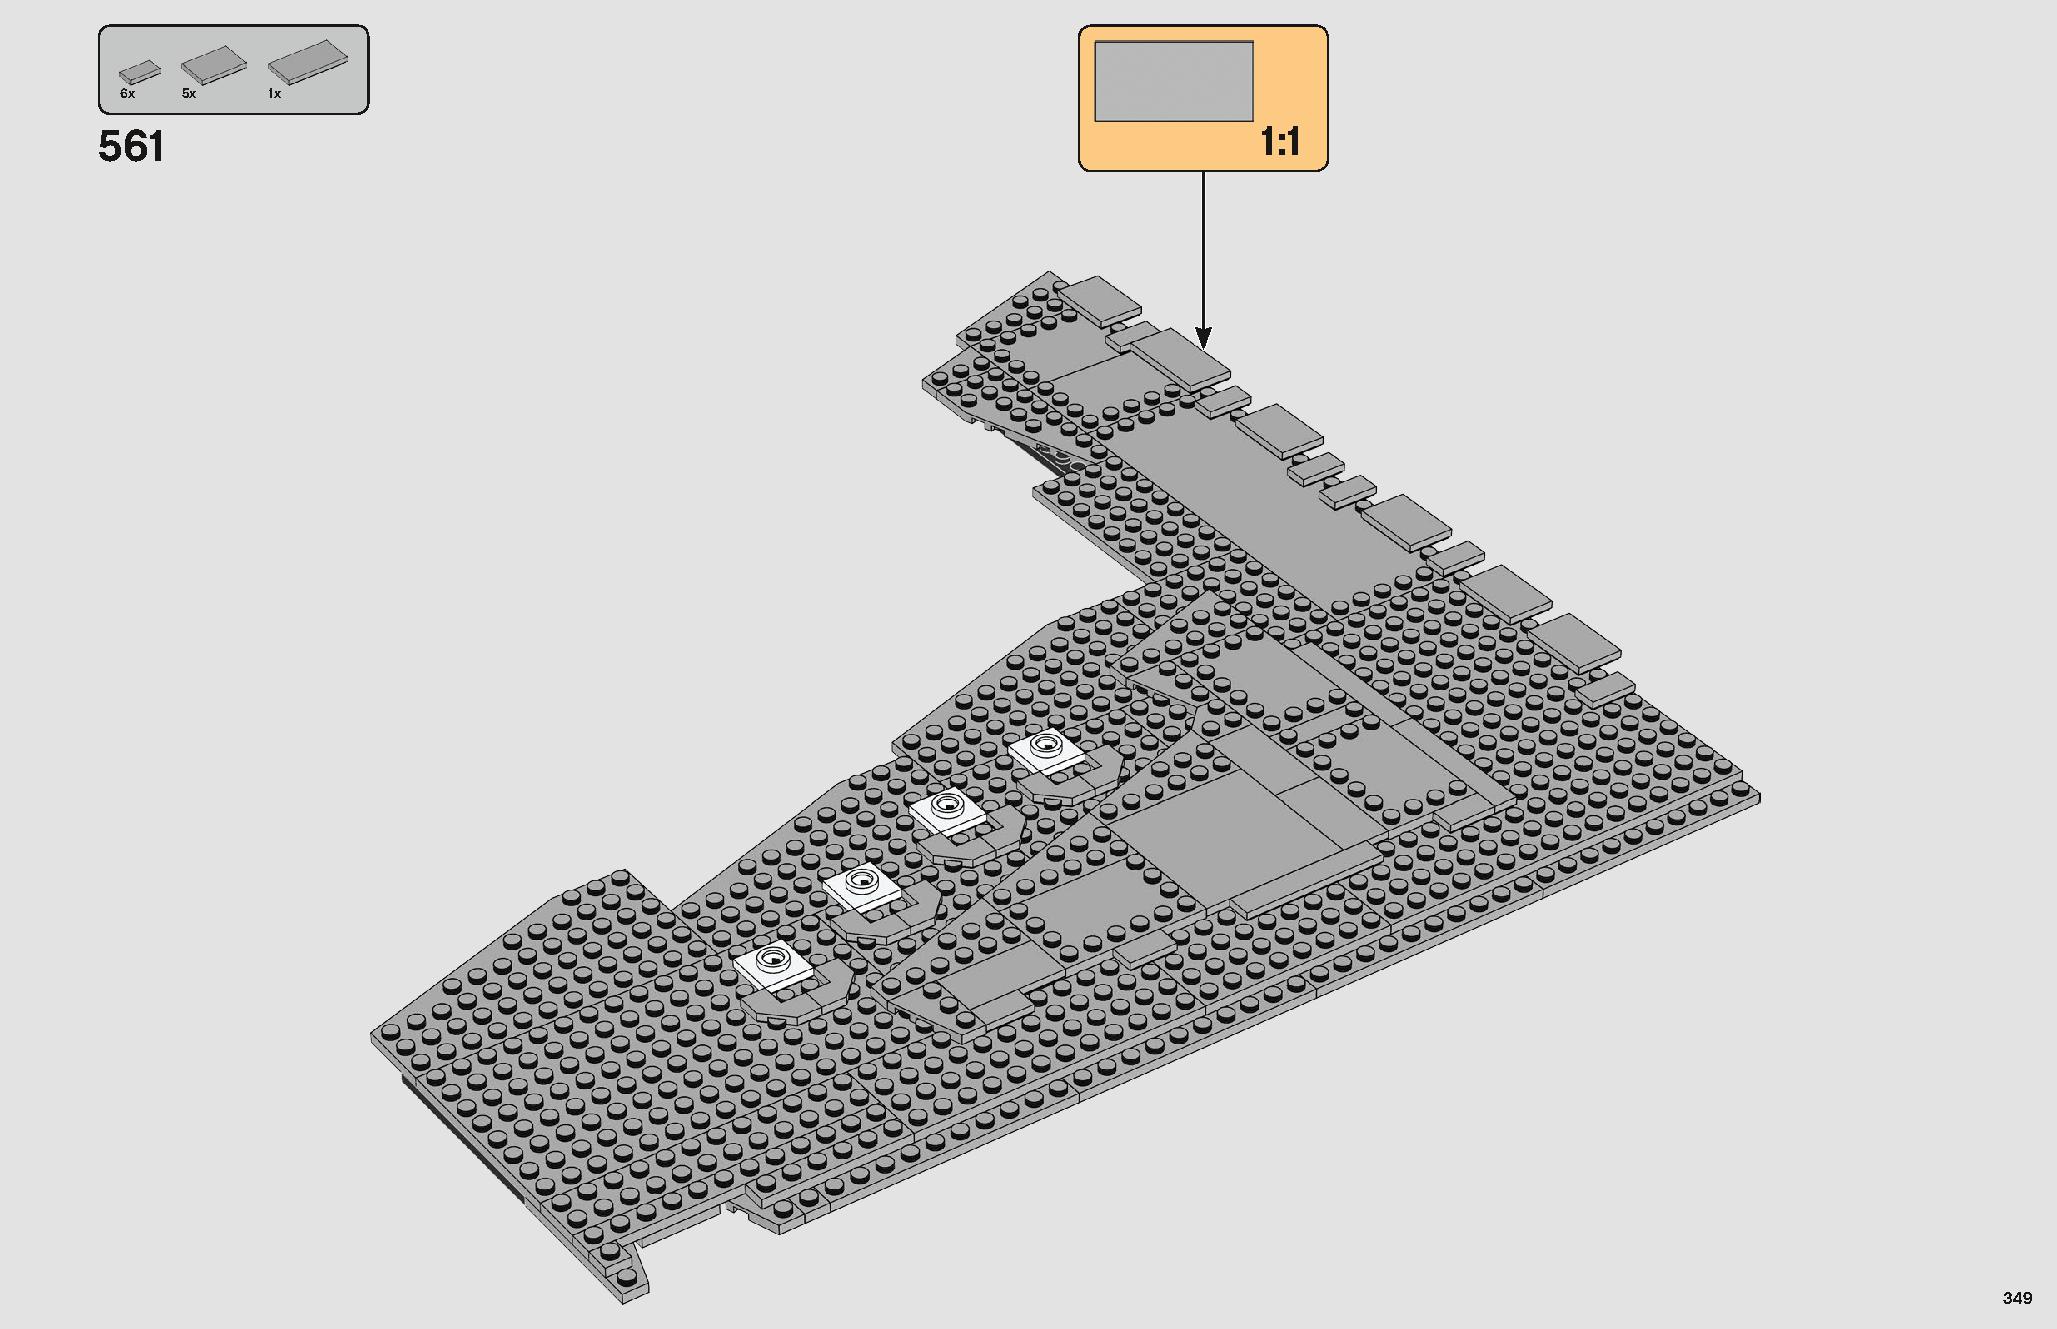 Imperial Star Destroyer 75252 LEGO information LEGO instructions 349 page